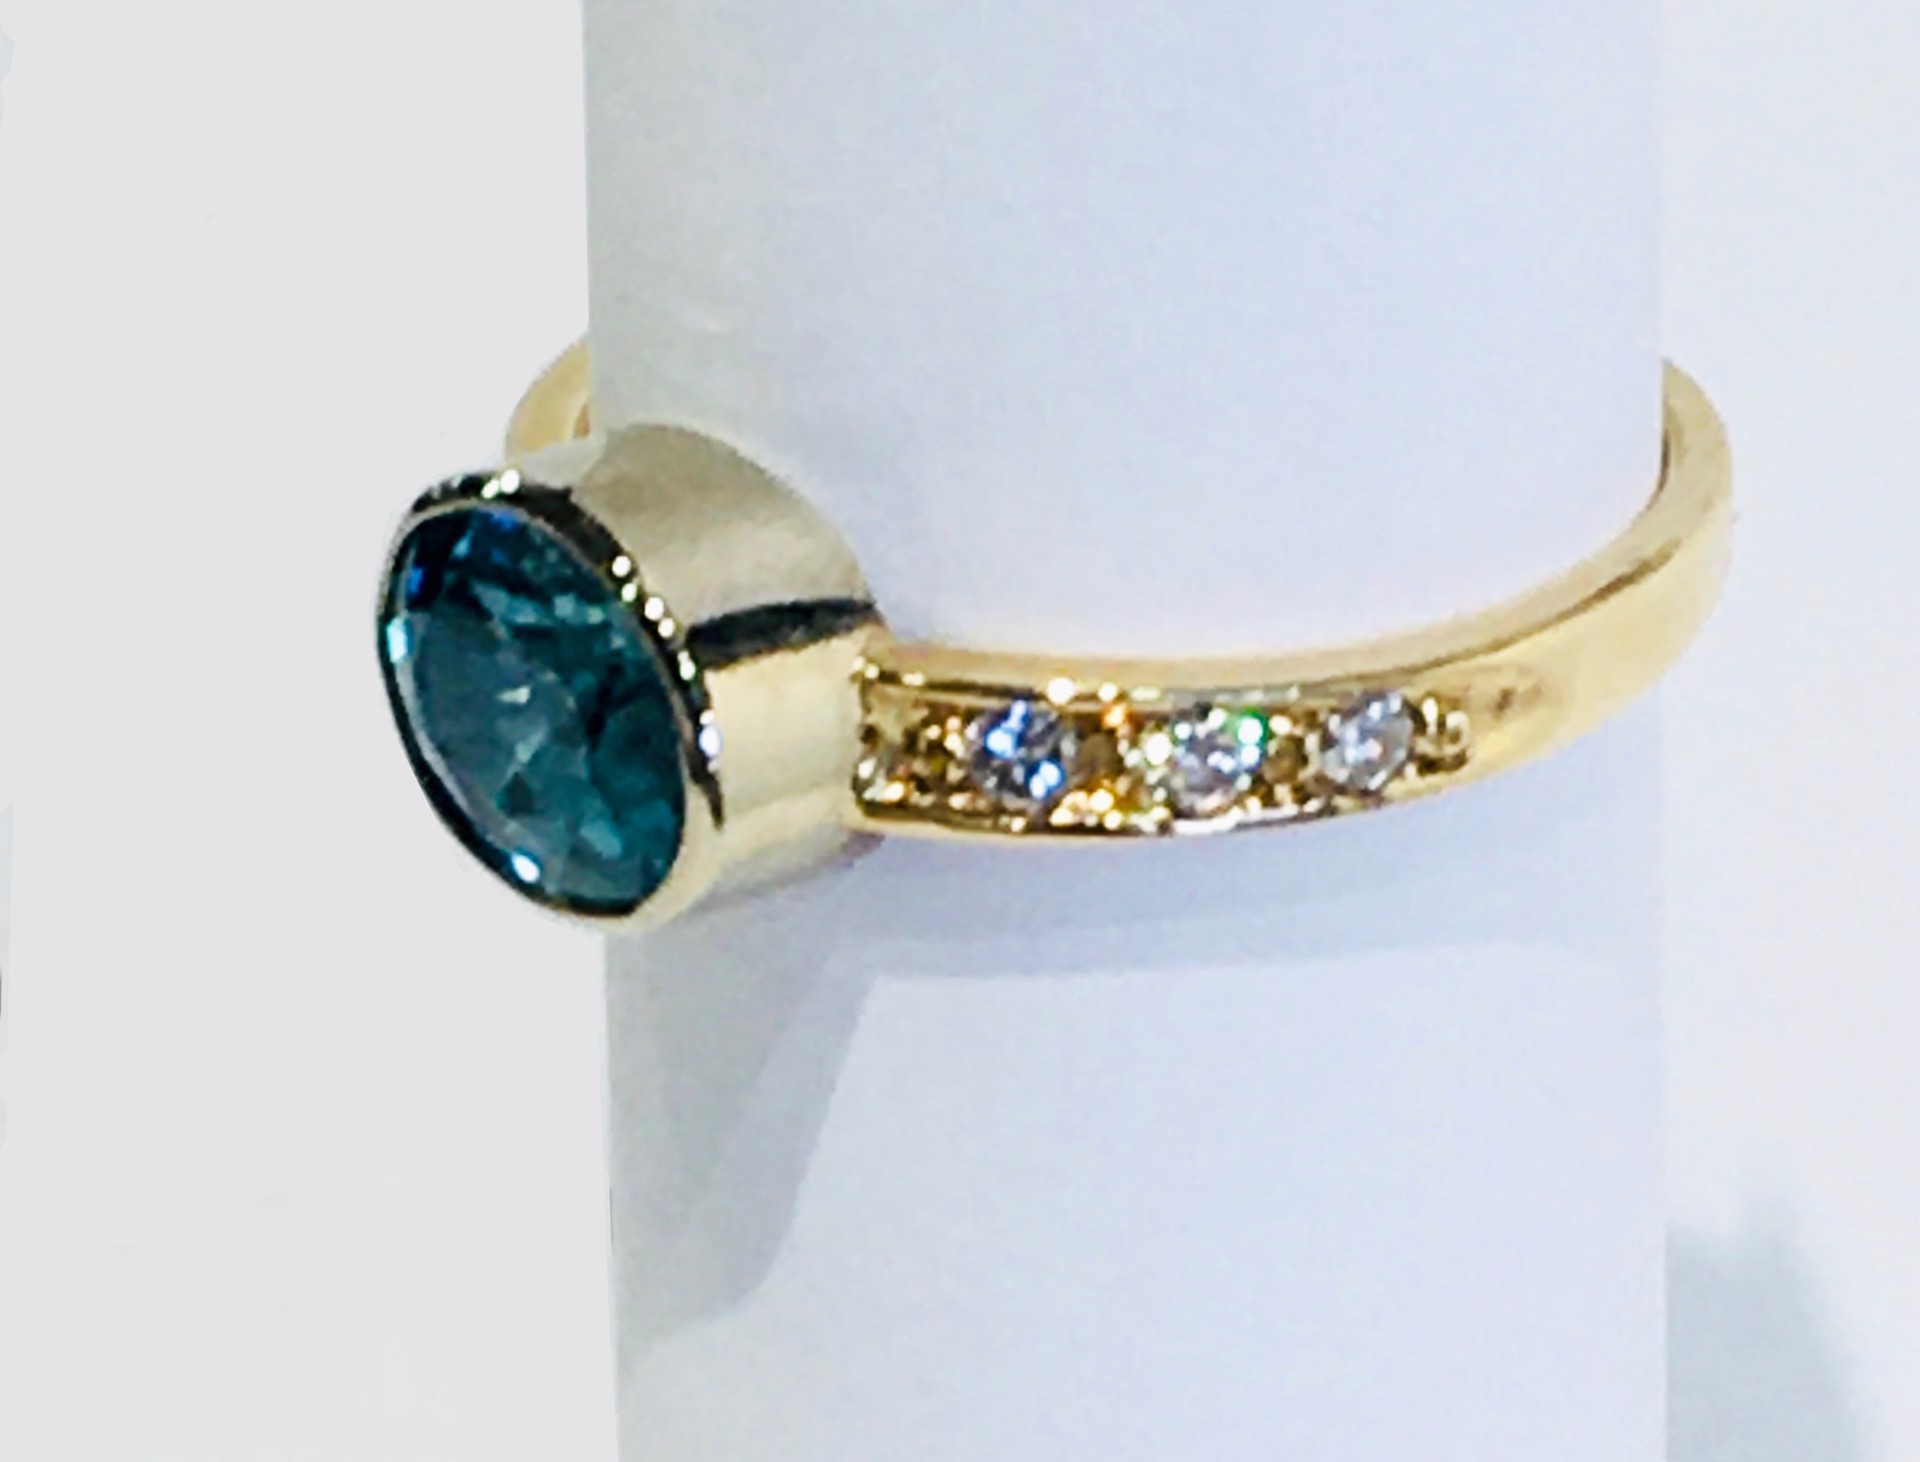 Zircon and Diamond Ring by D'ETTE DELFORGE